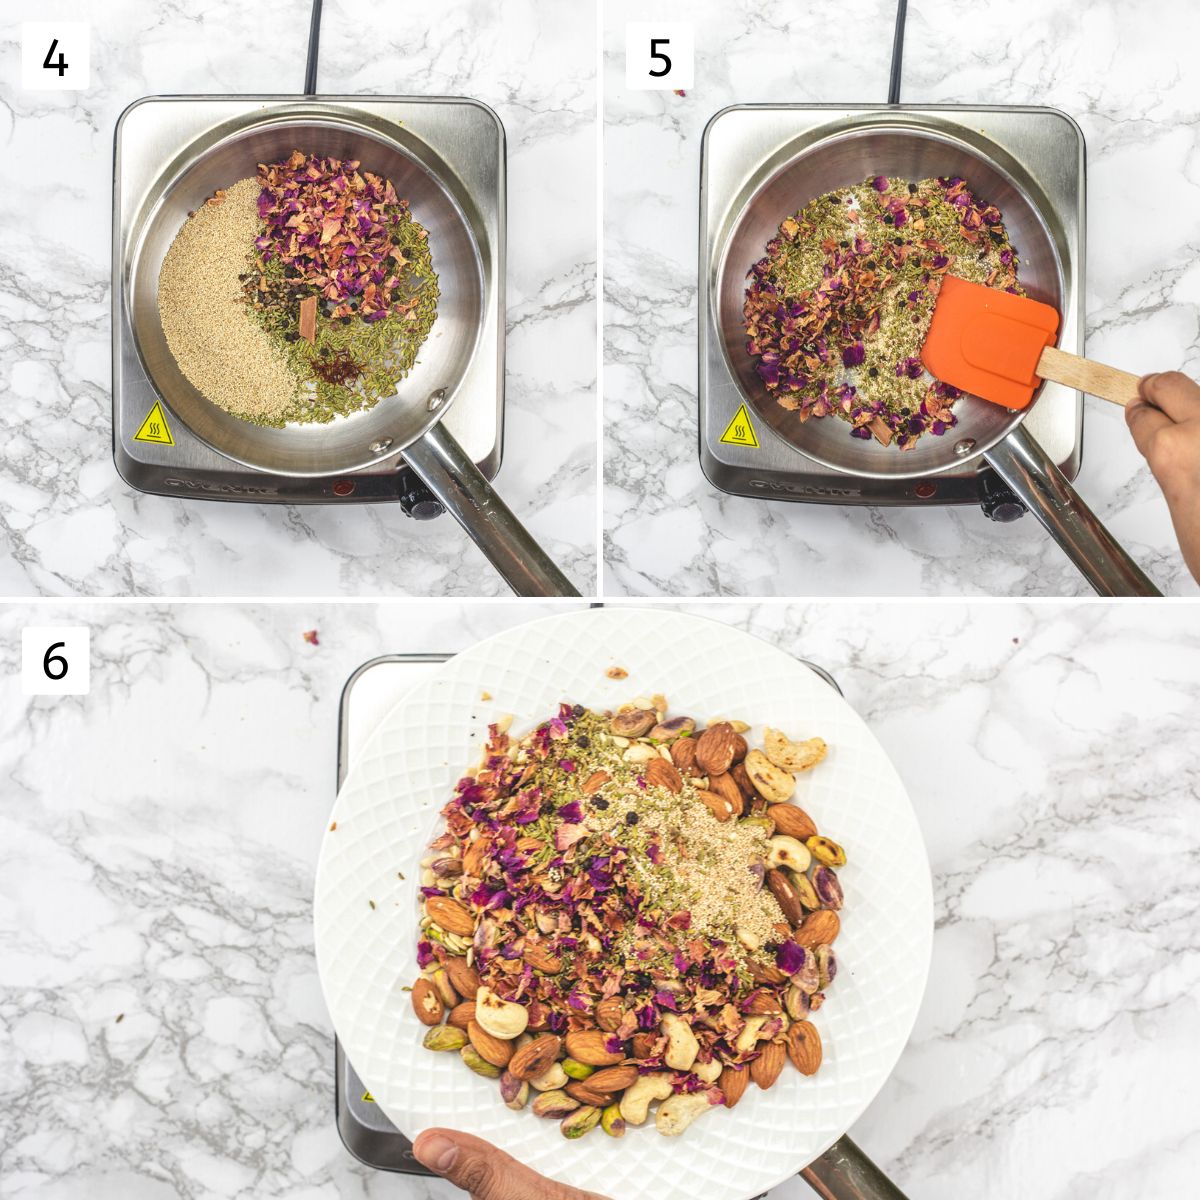 Collage of 3 images showing dry roasting seeds, spices, rose petals and removed to a plate.